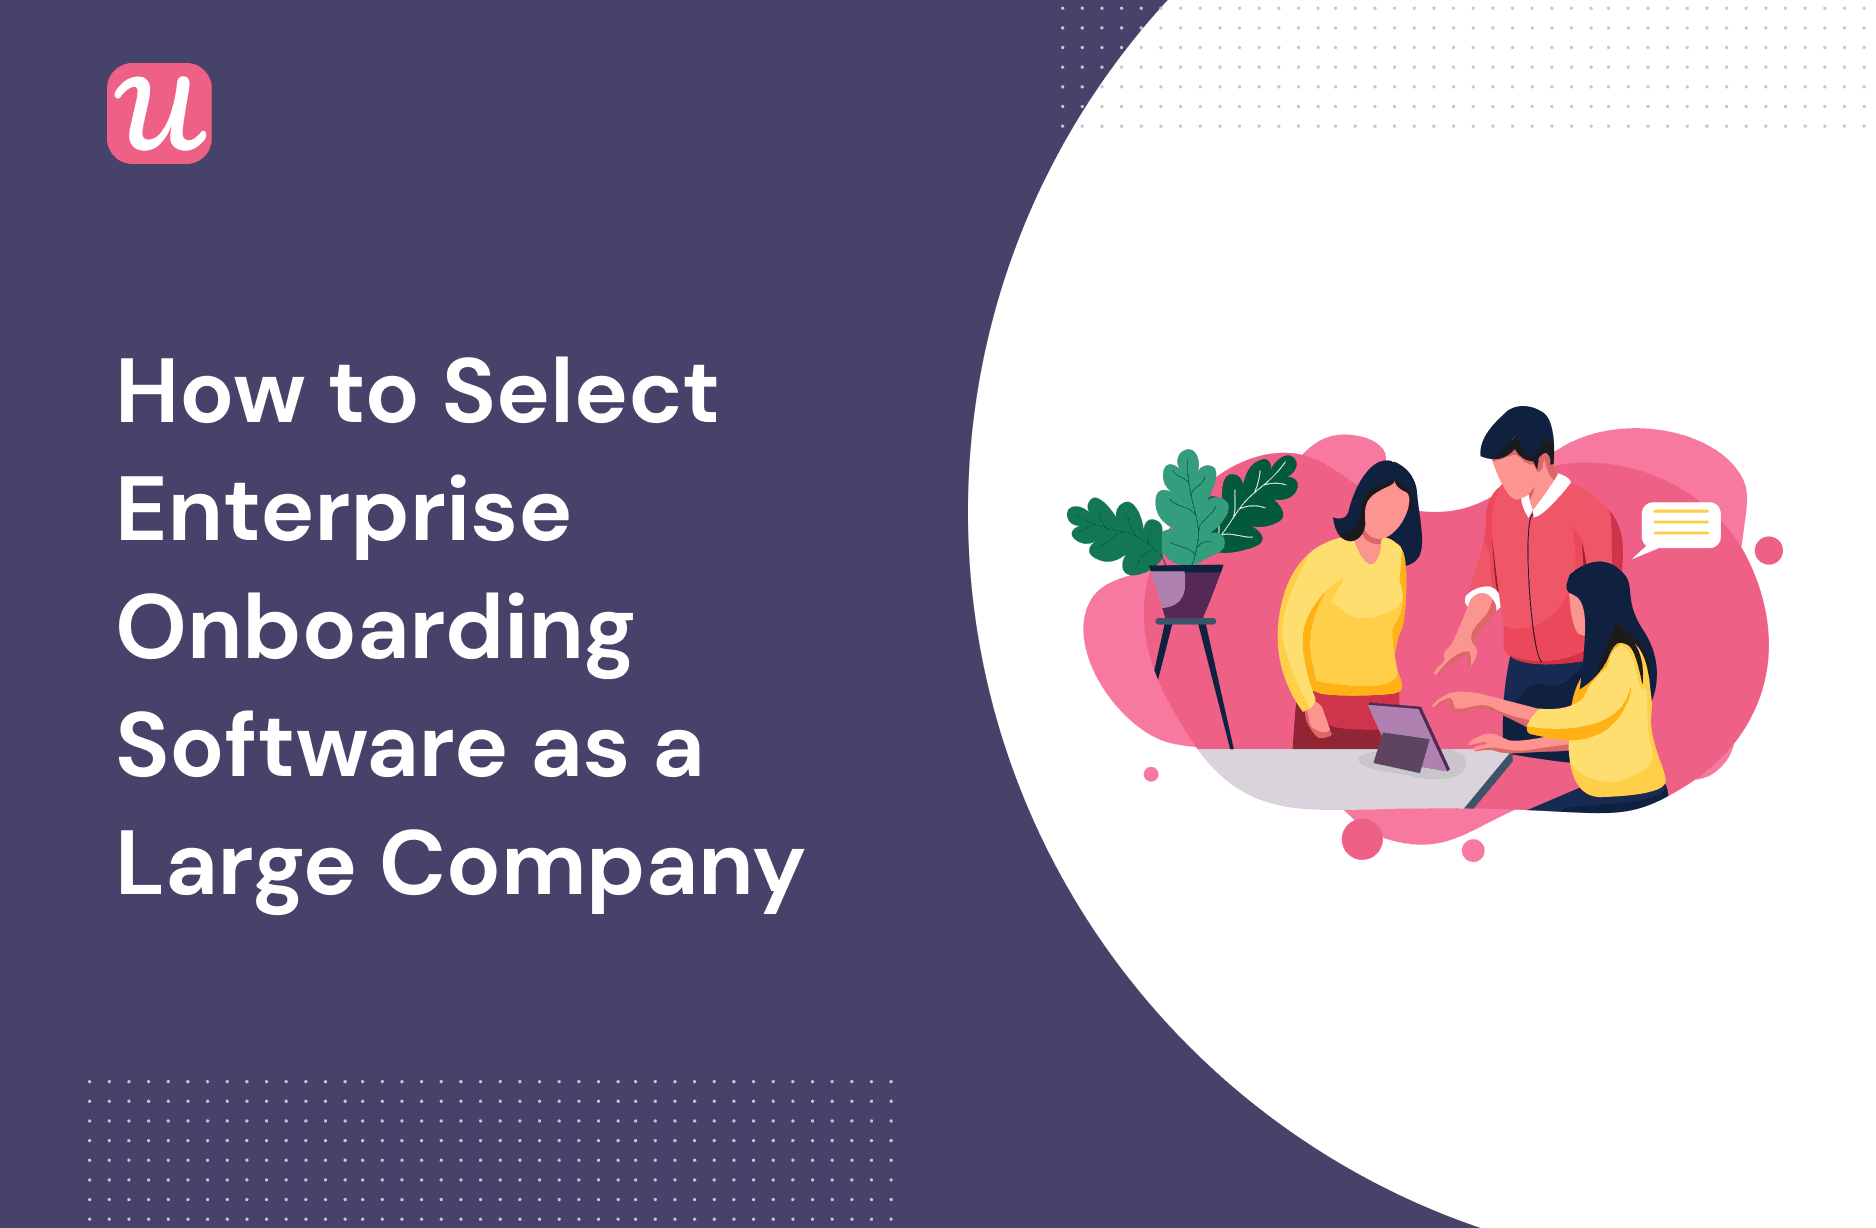 How to Select Enterprise Onboarding Software as a Large Company